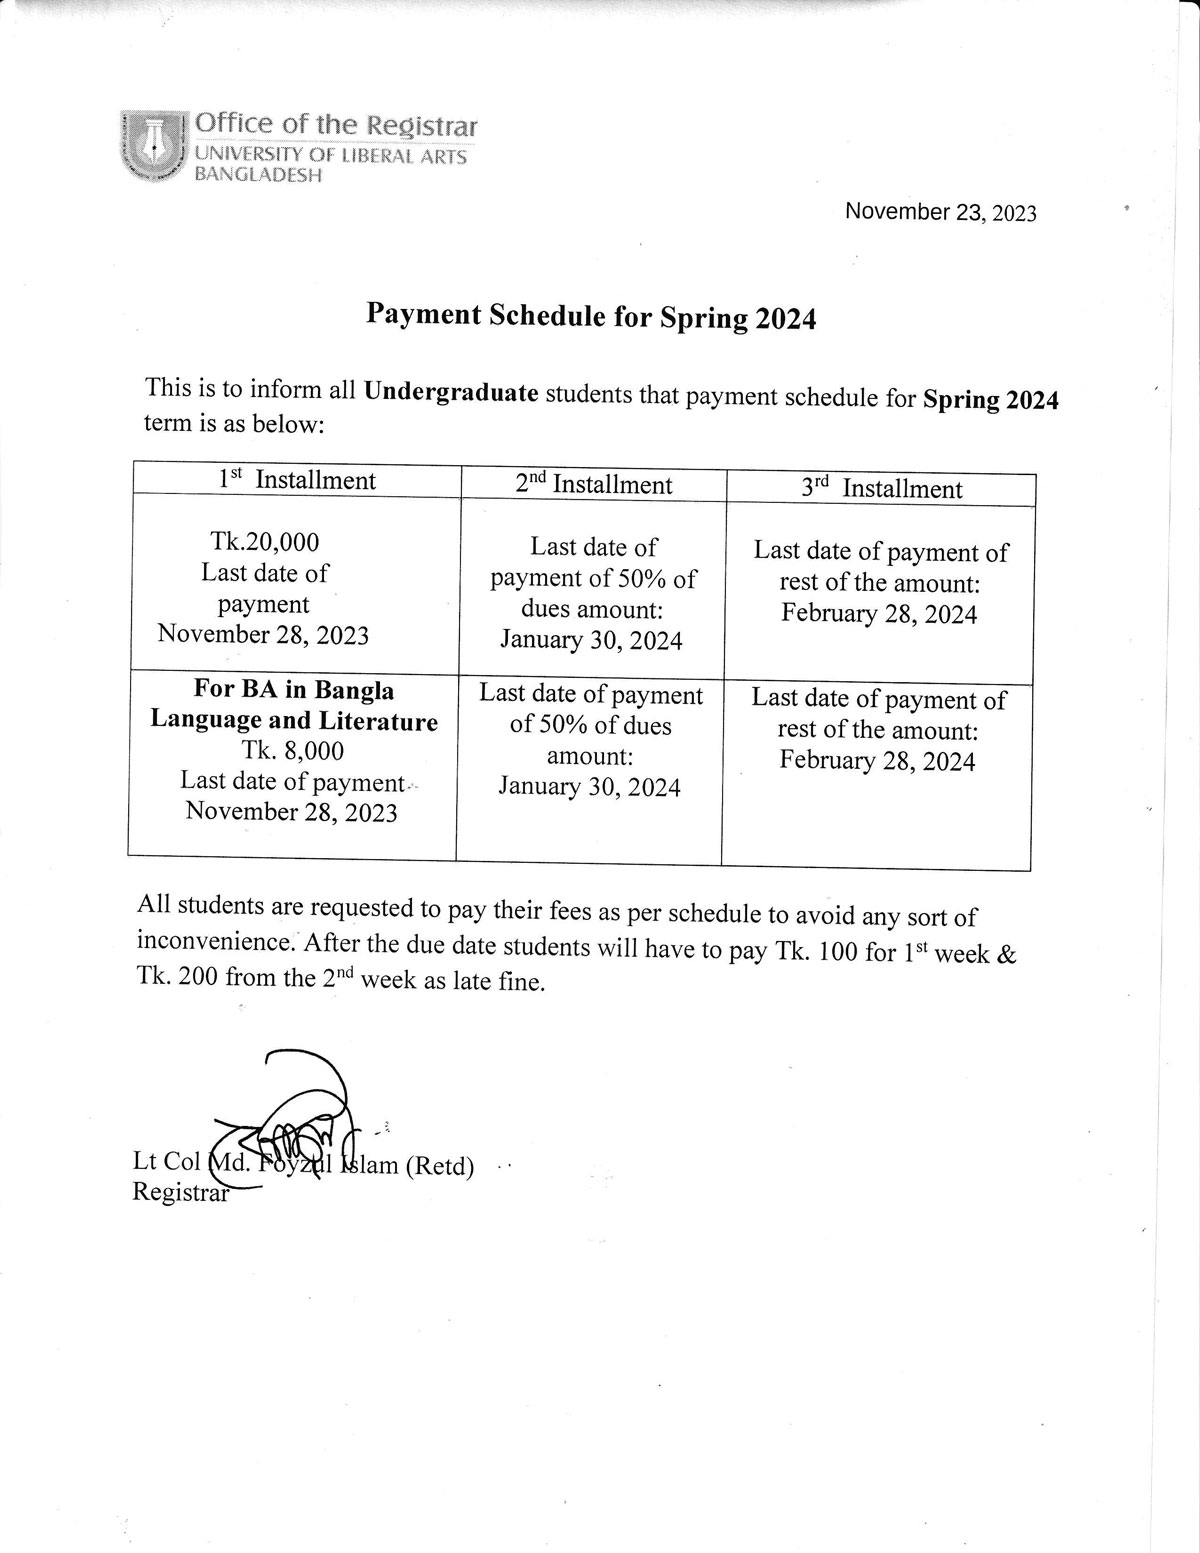 Payment Schedule Spring 2024 UG 